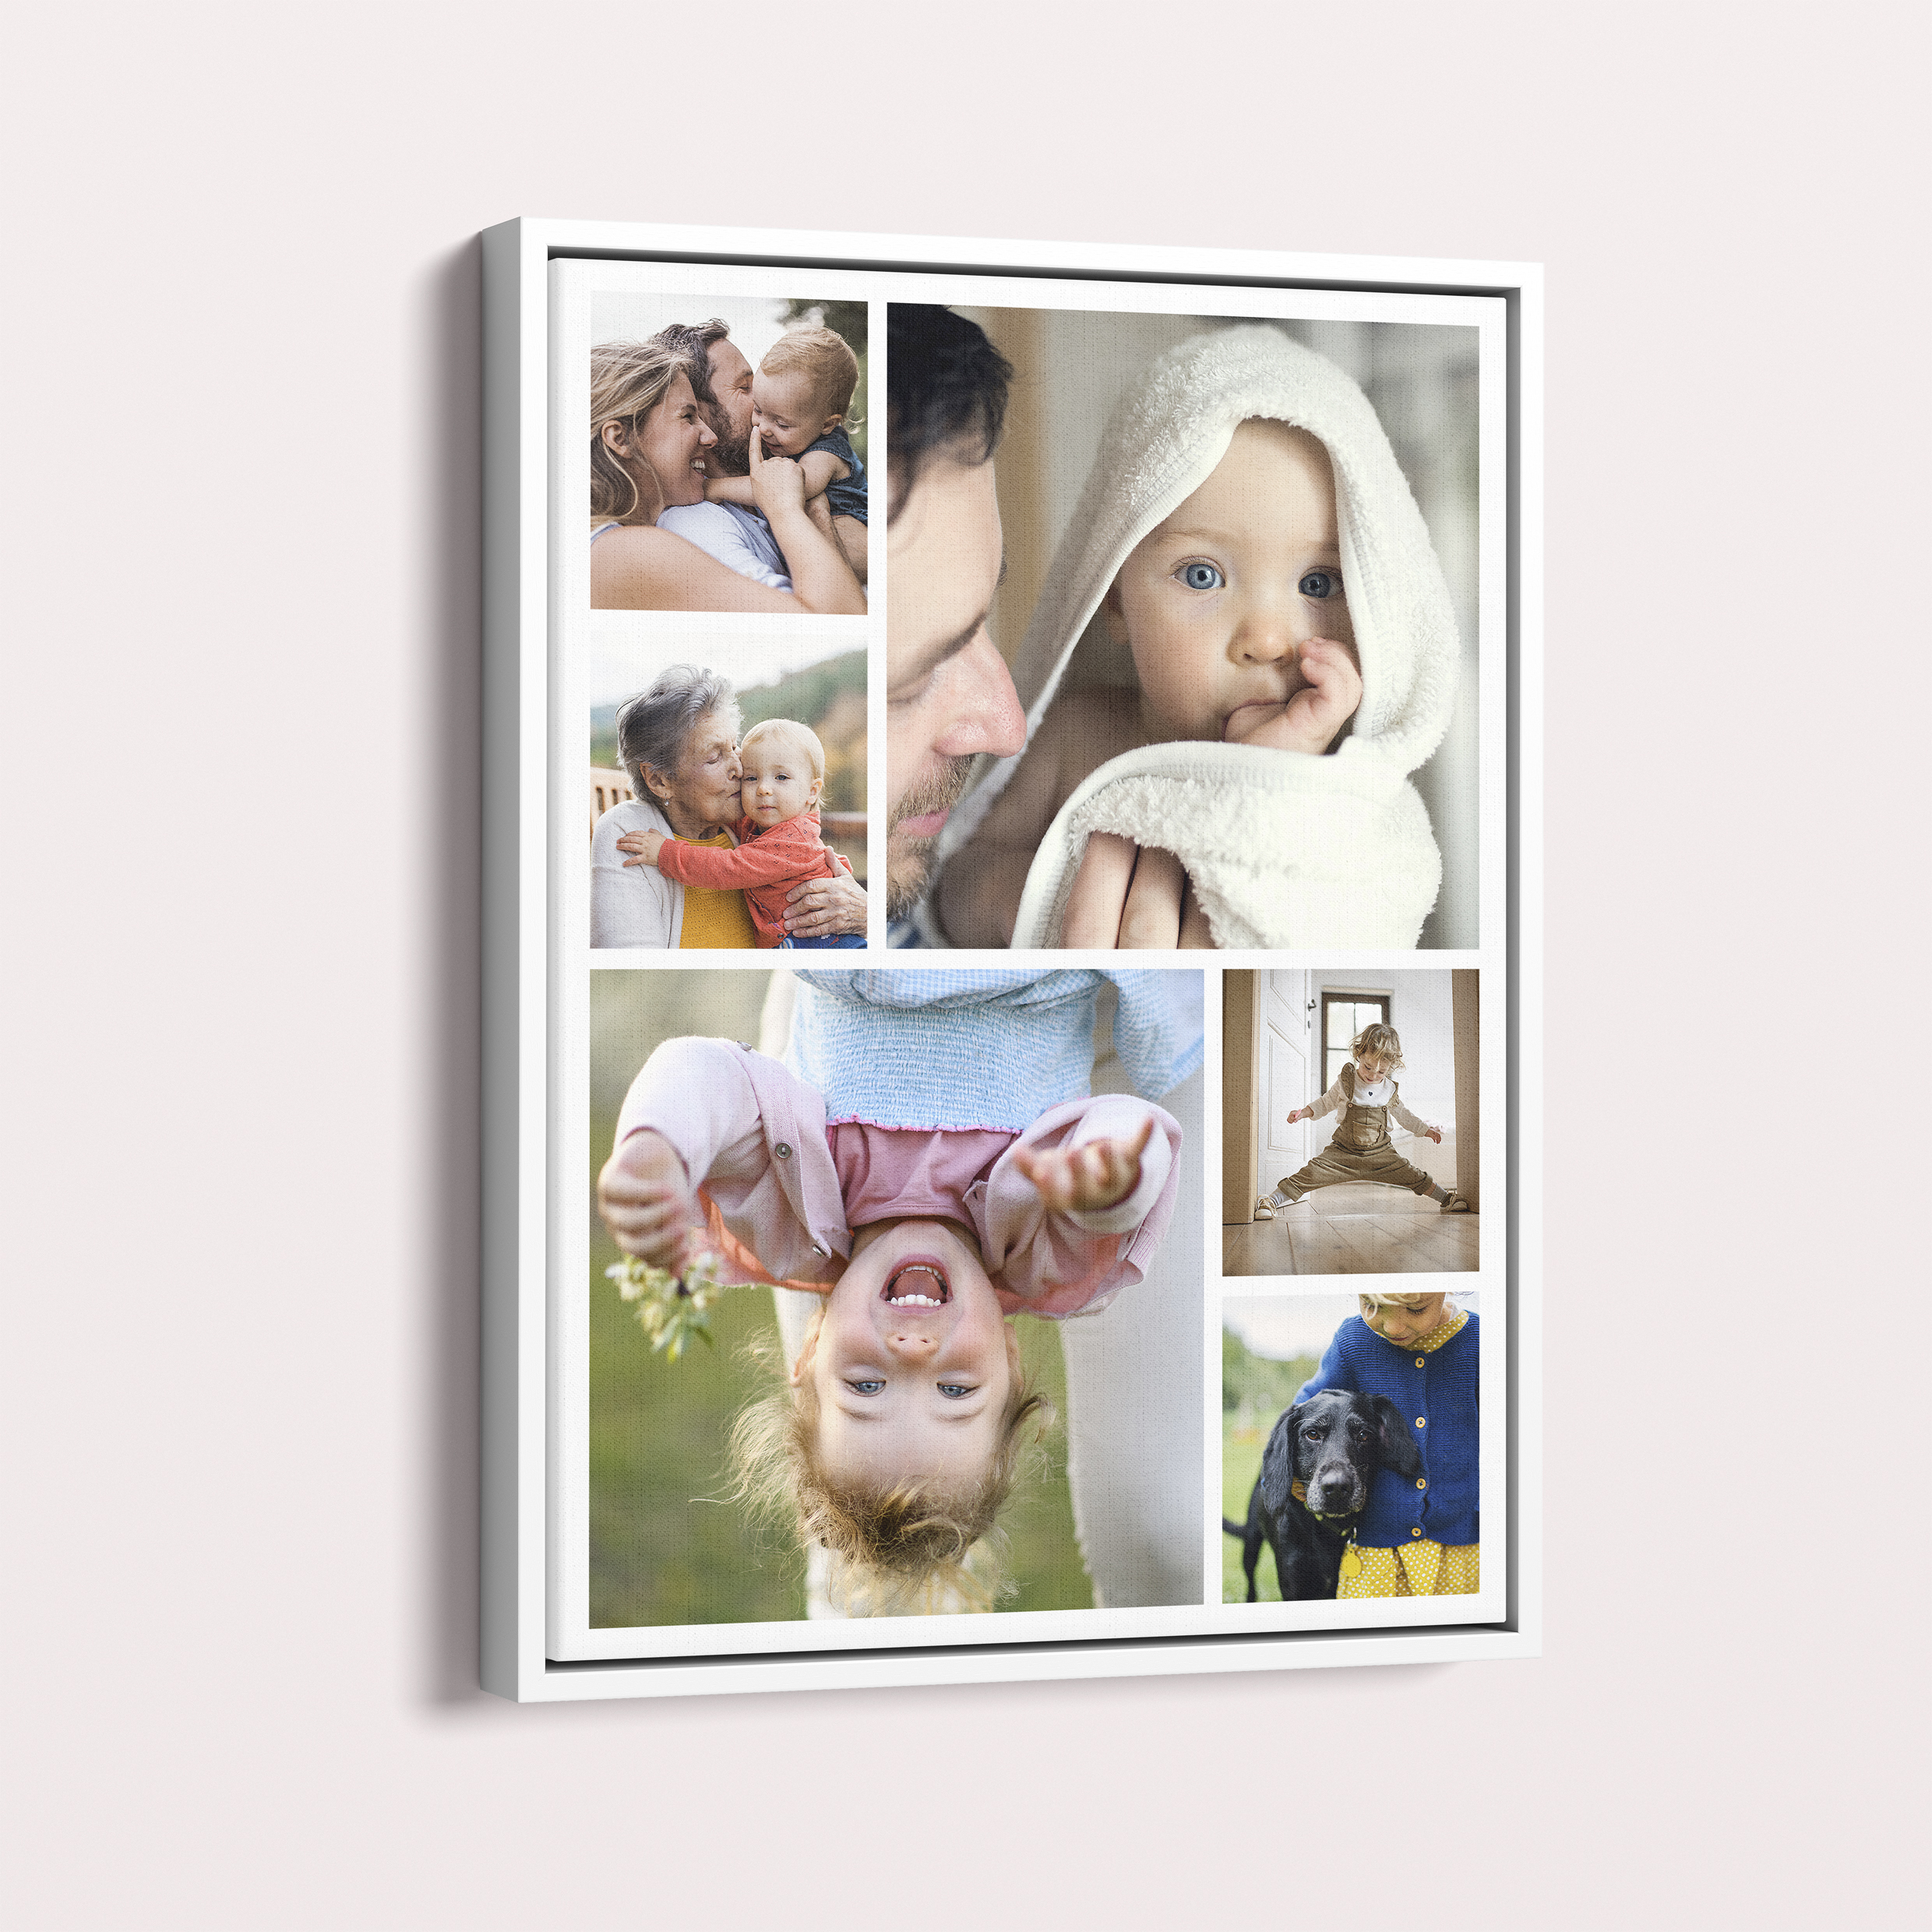 Utterly Printable's Kaleidoscope Memories Framed Photo Canvas - A Captivating Collage of Cherished Moments